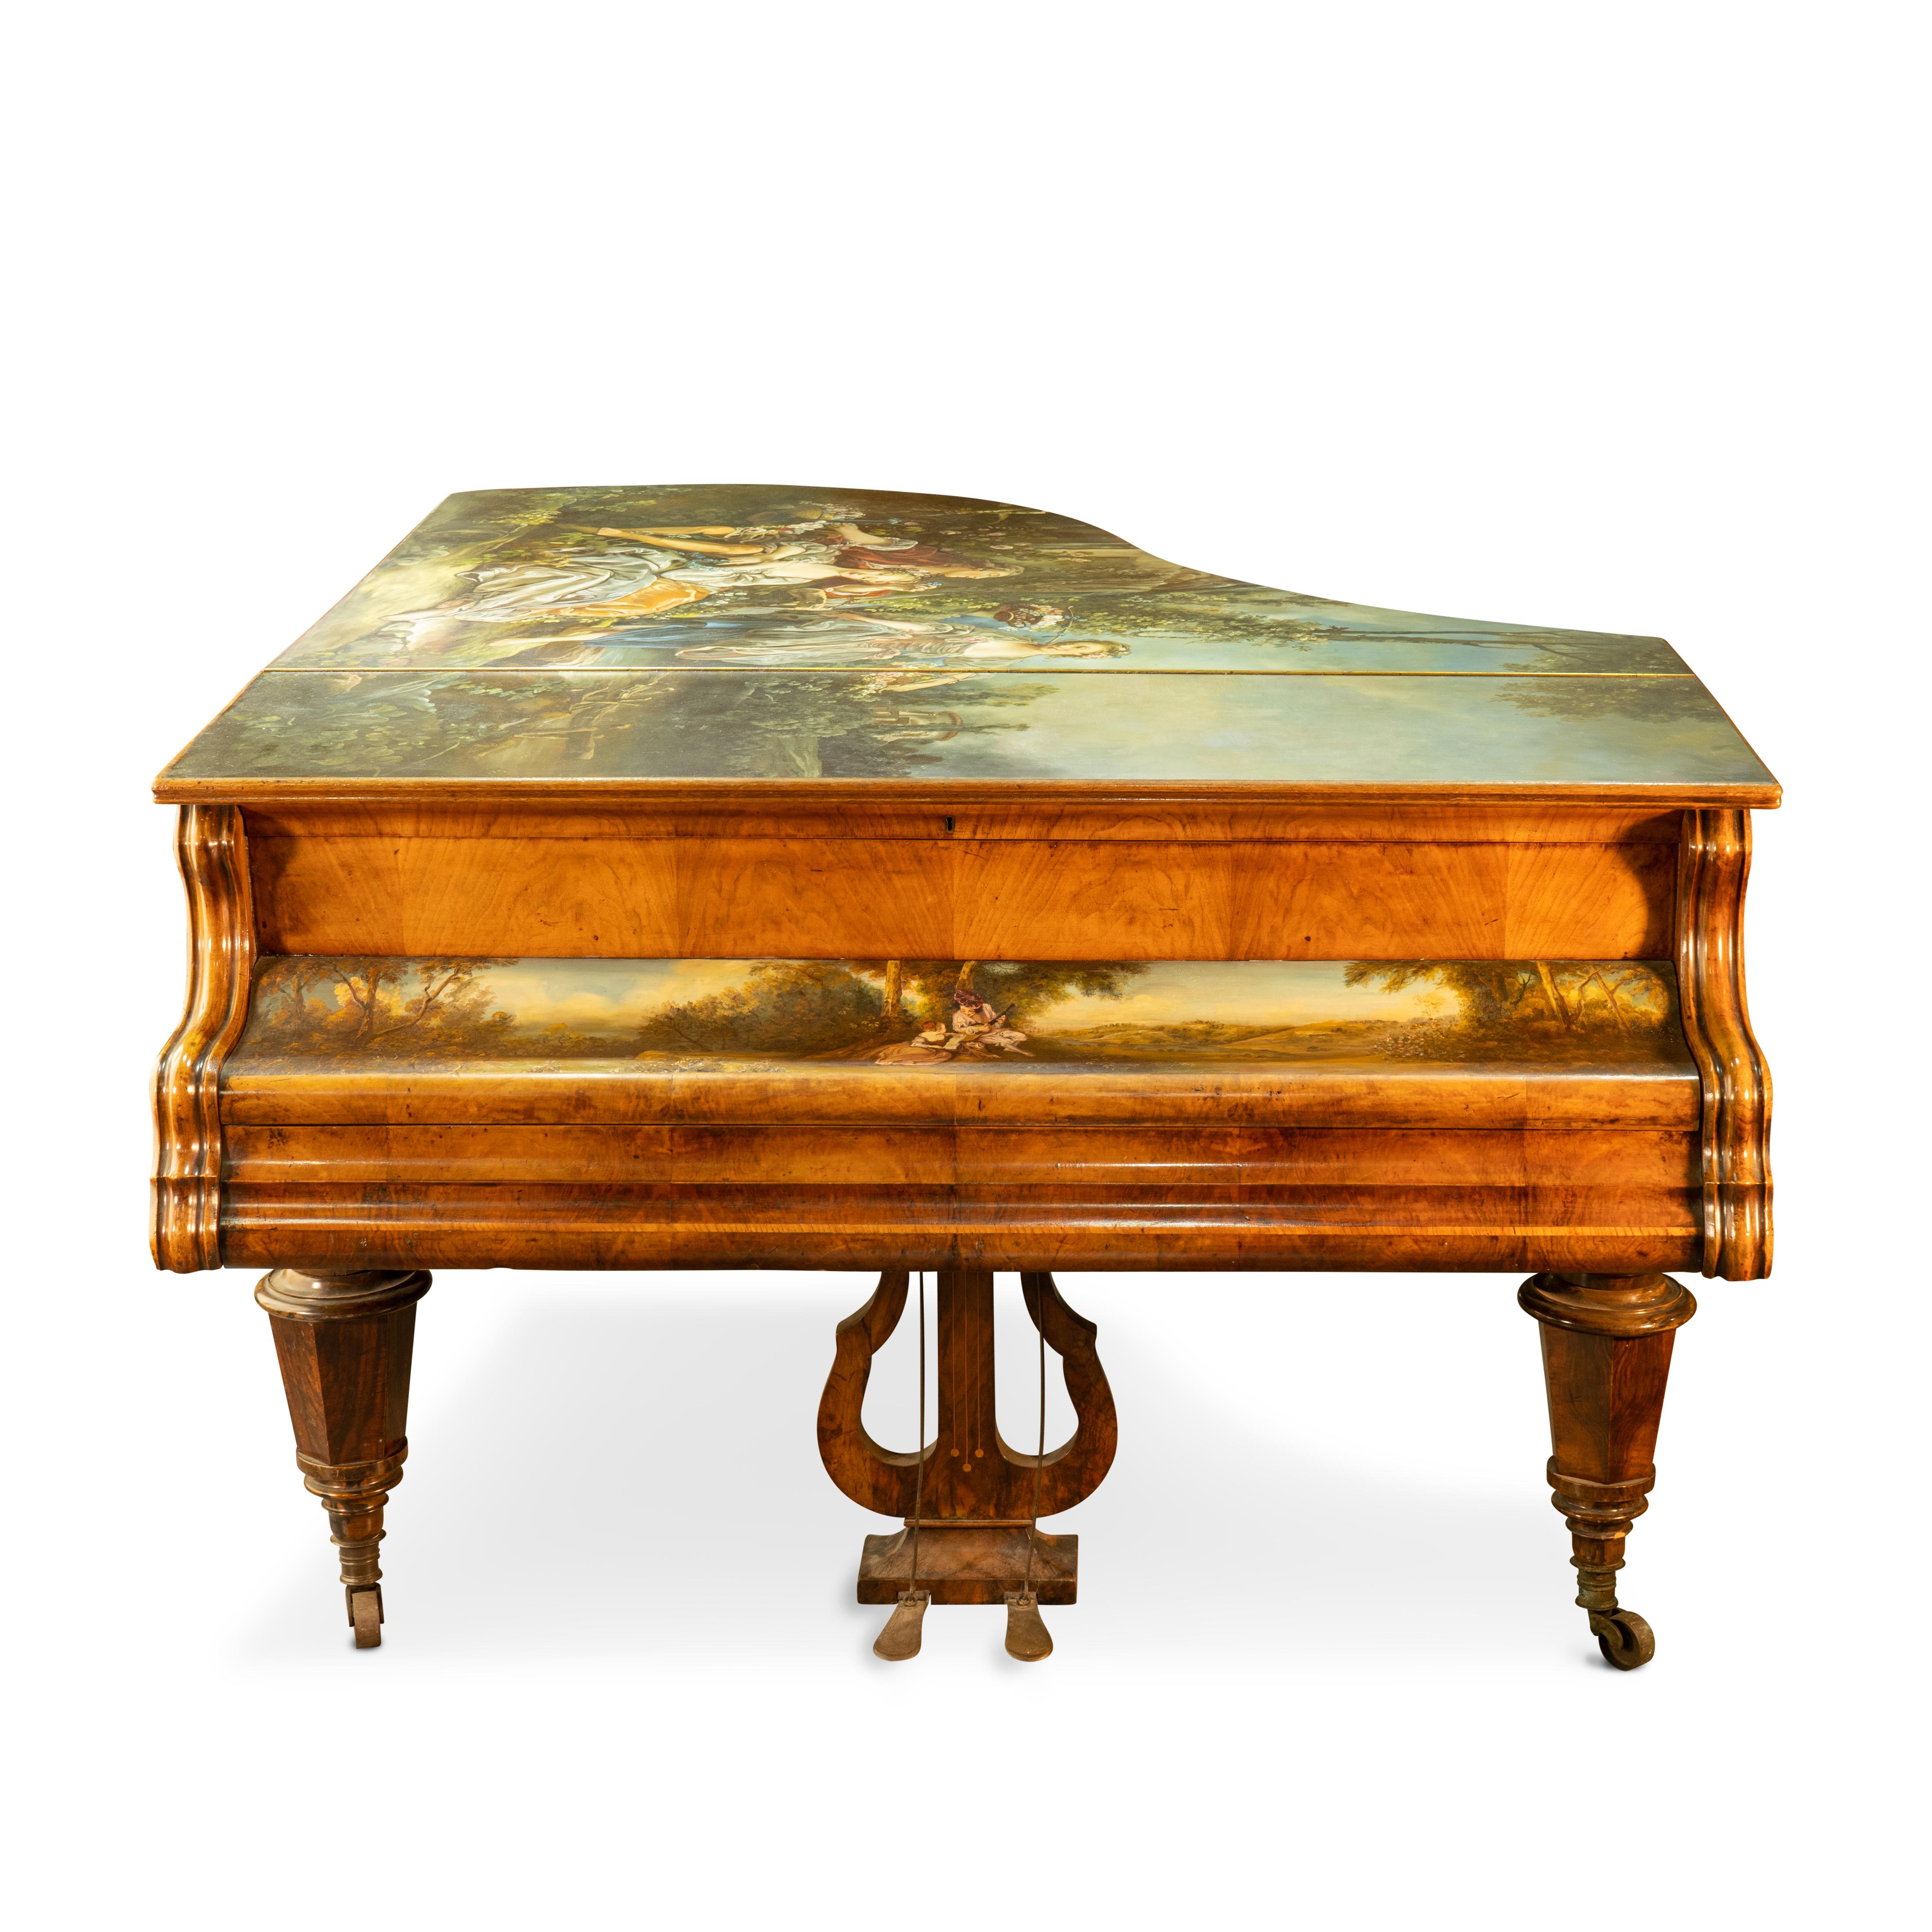 A magnificent antique Austrian baby Grand piano by Promberger & Son. The hinged serpentine top and the case sides later decorated overall with 18th century style paintings in the manner of Francois Boucher. with pierced music stand and lyre-form